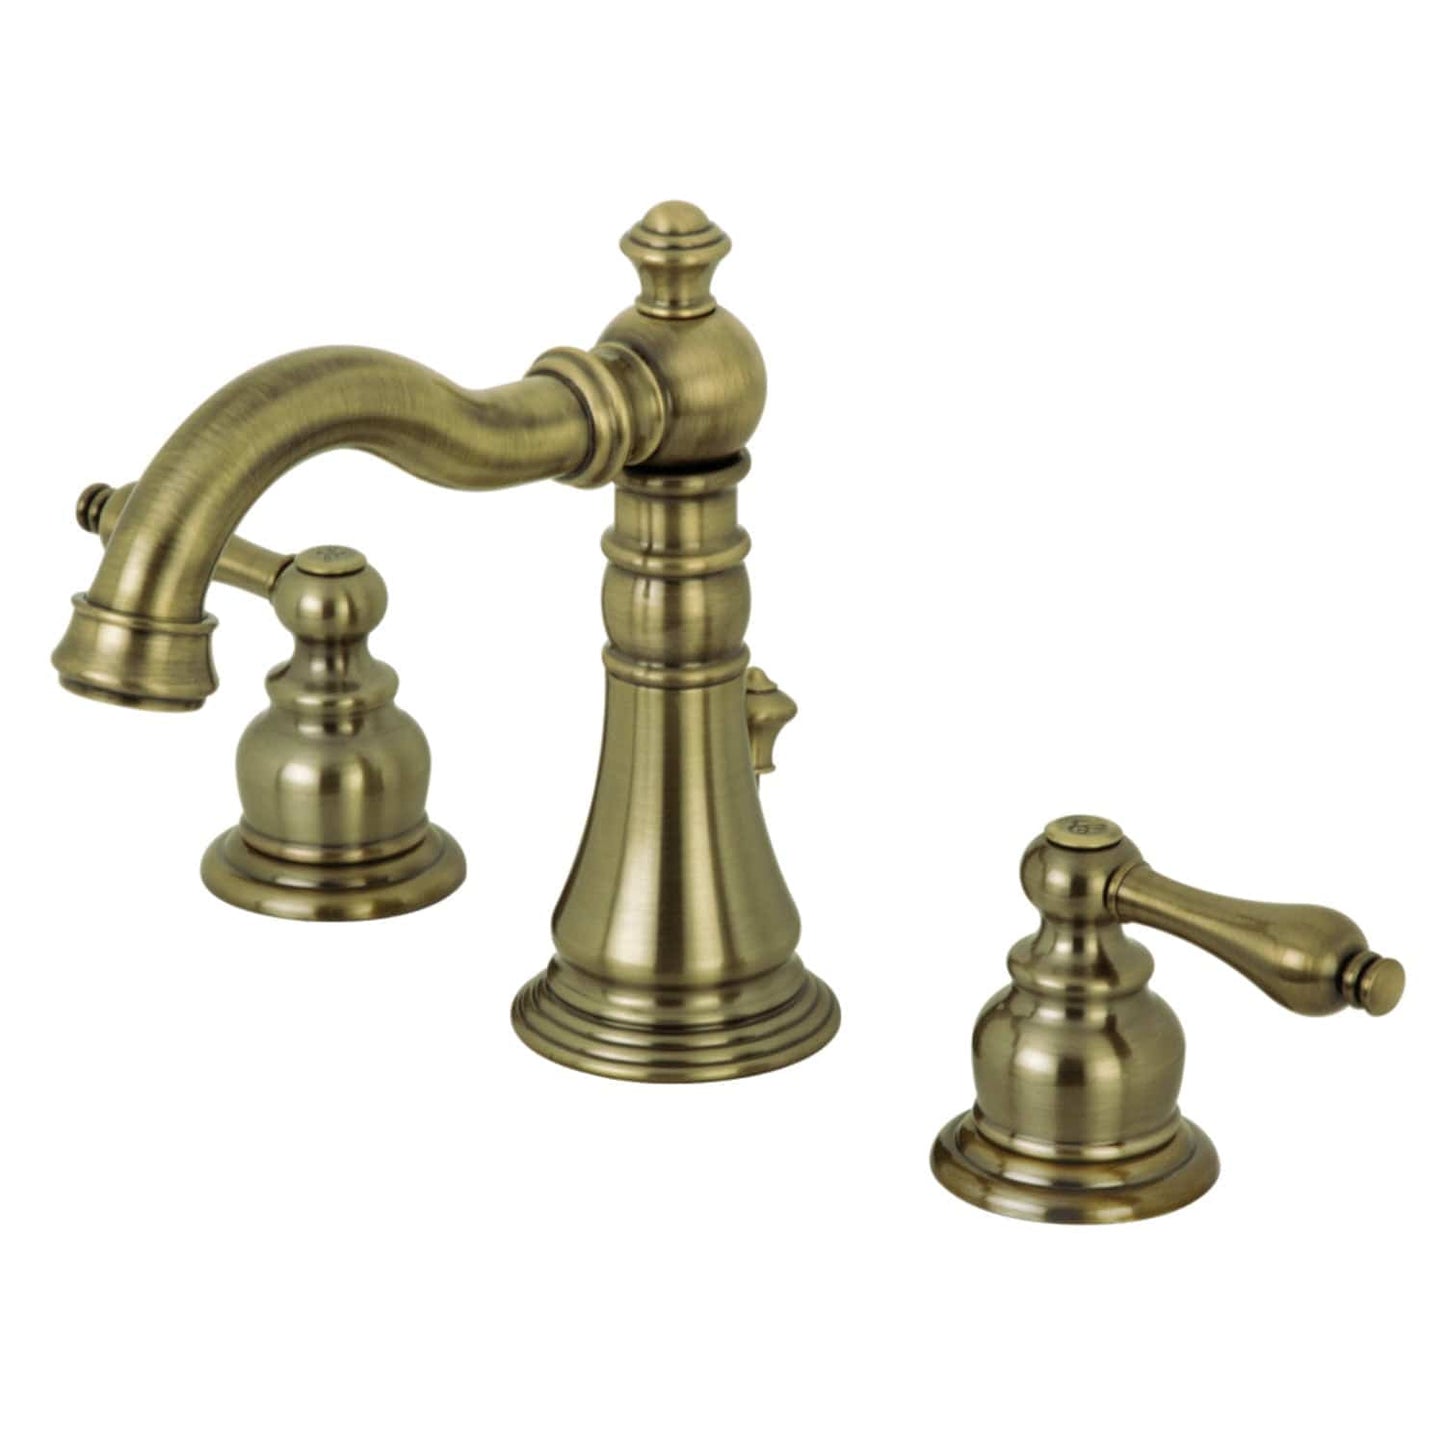 KINGSTON Brass Fauceture English Classic Widespread Bathroom Faucet - Antique Brass